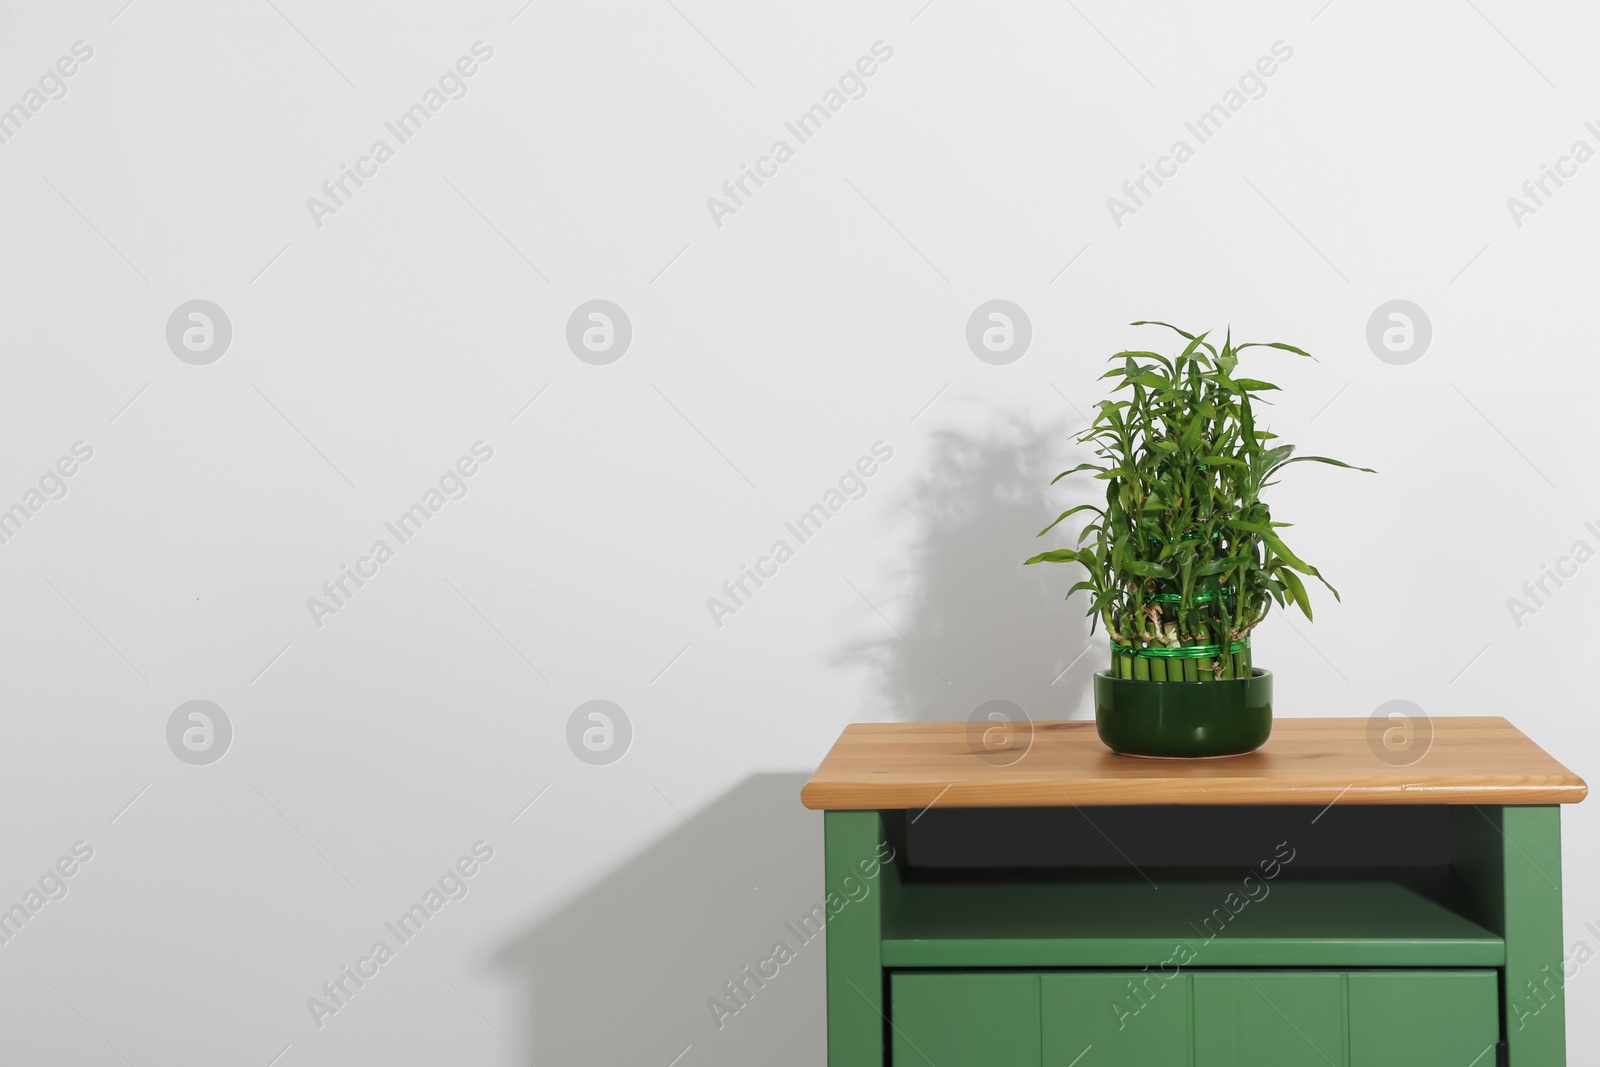 Photo of Pot with green bamboo on nightstand against light background. Space for text